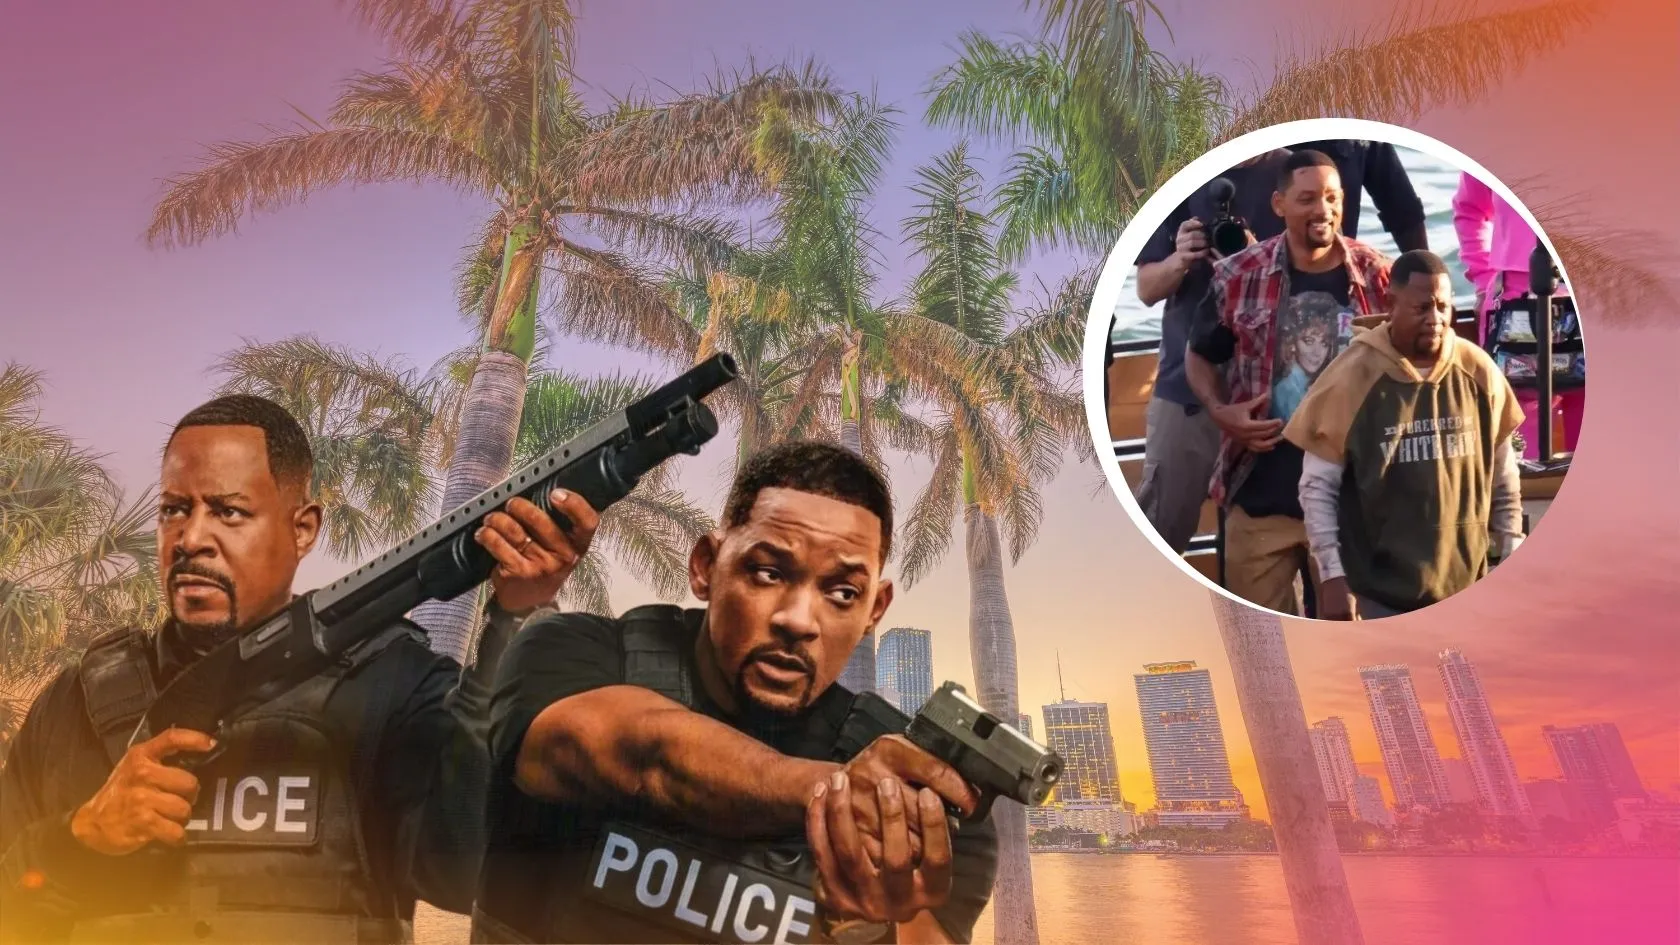 Will Smith and Martin Lawrence Spotted Filming 'Bad Boys 4' in Miami